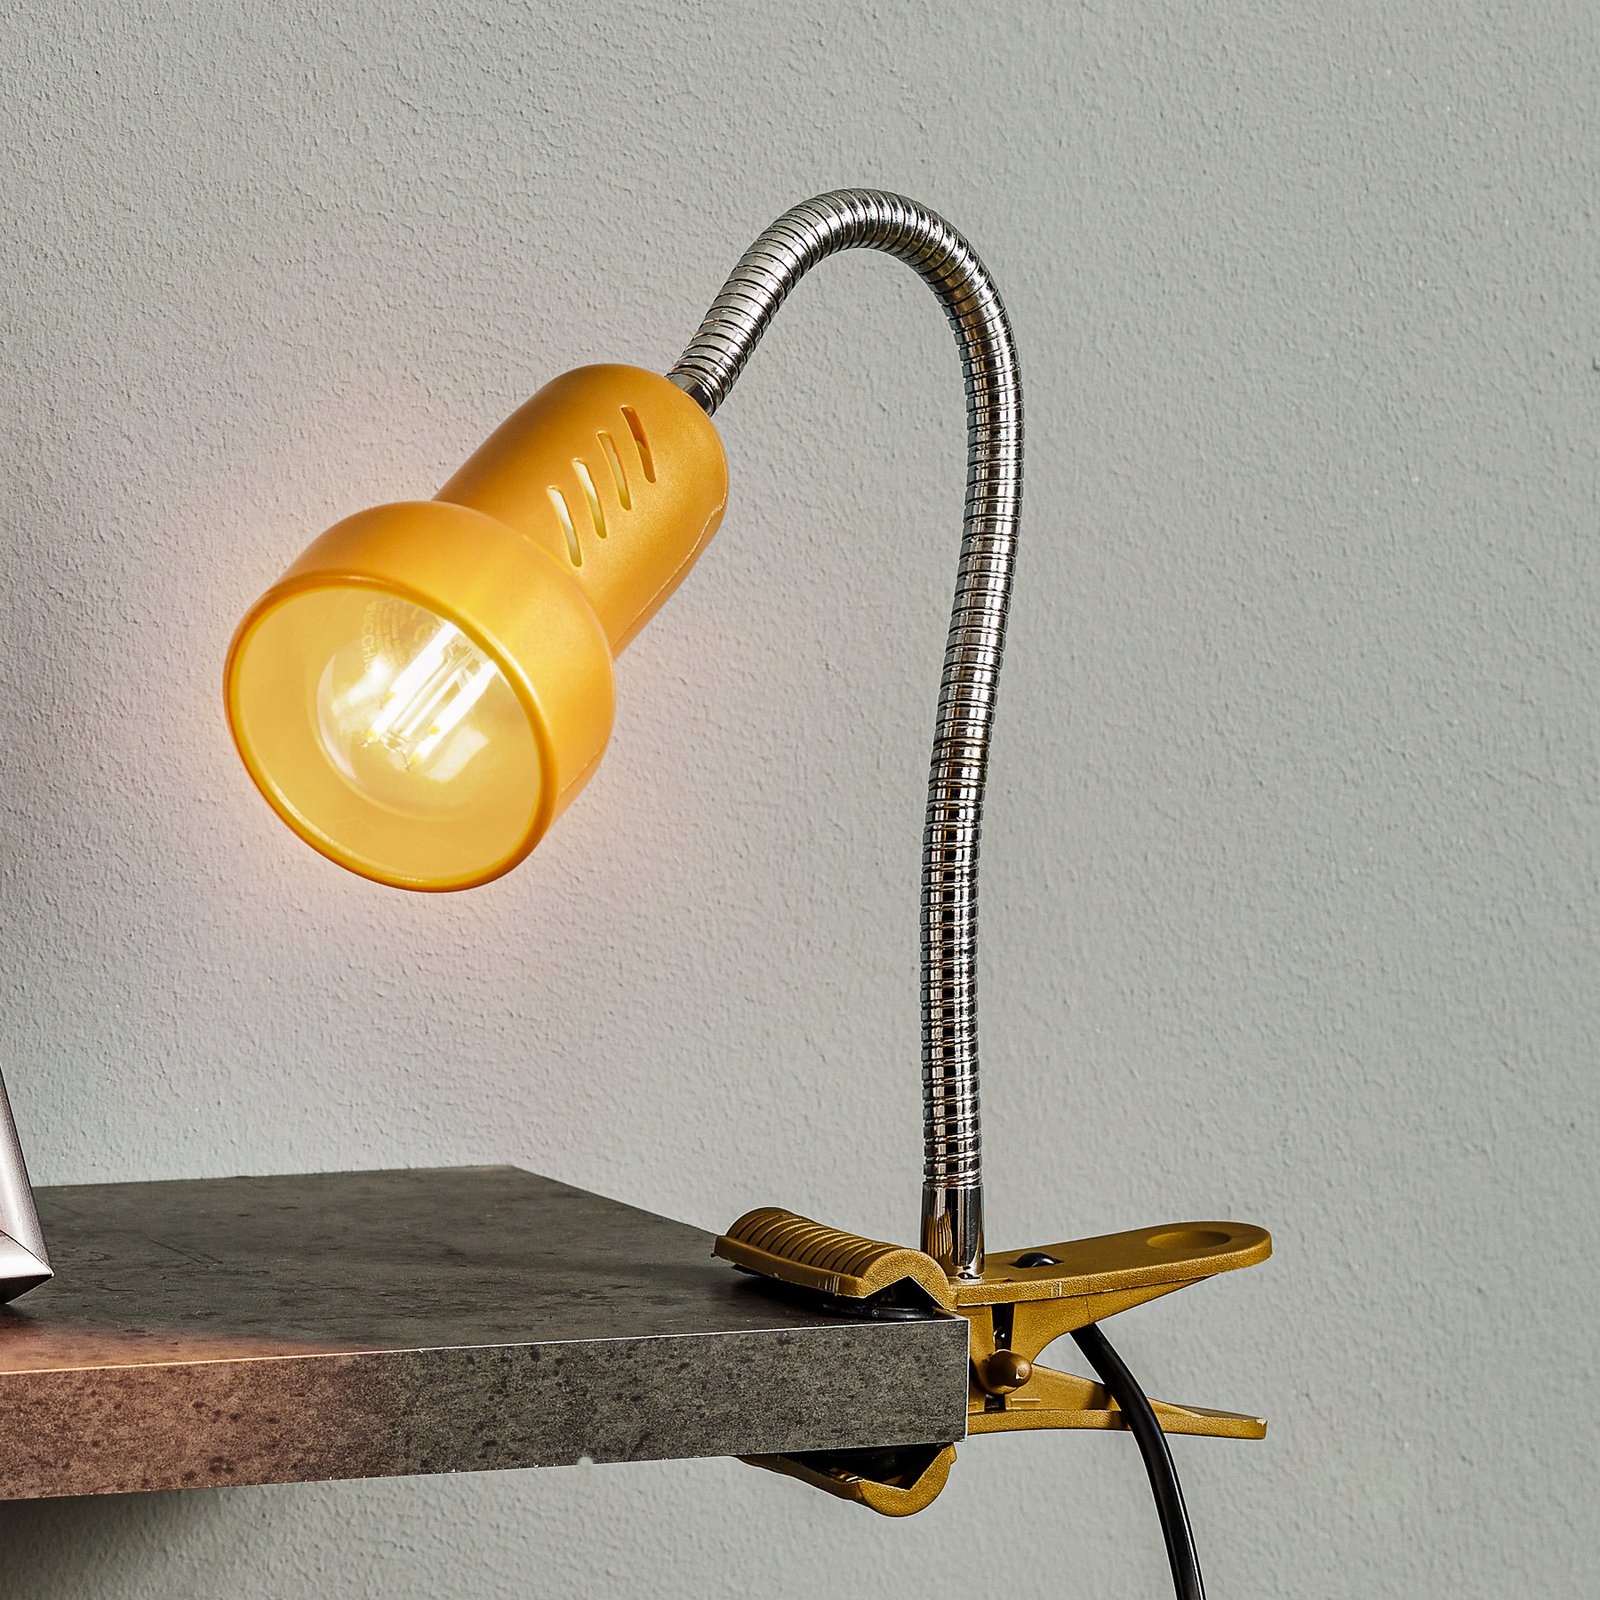 Lolek clip-on light with a flexible arm, gold